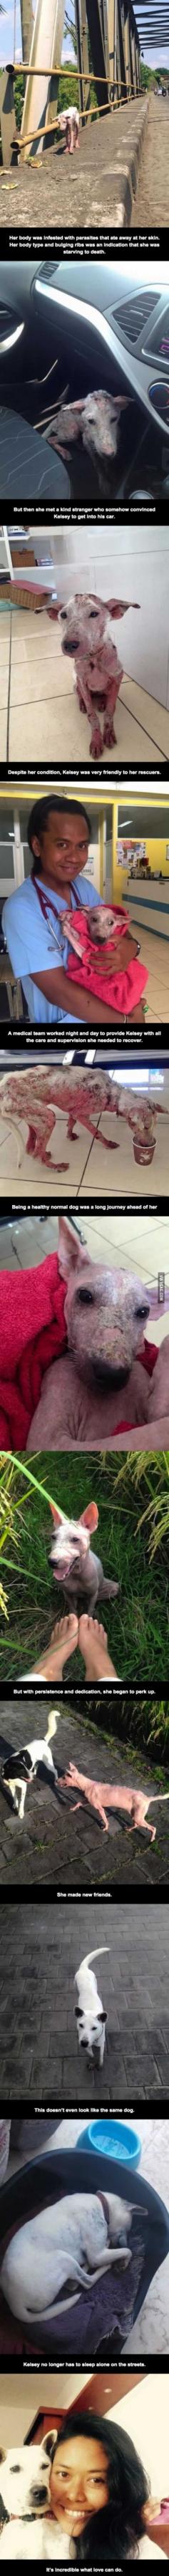 I actually feel like crying whenever I see any animal hurt like that